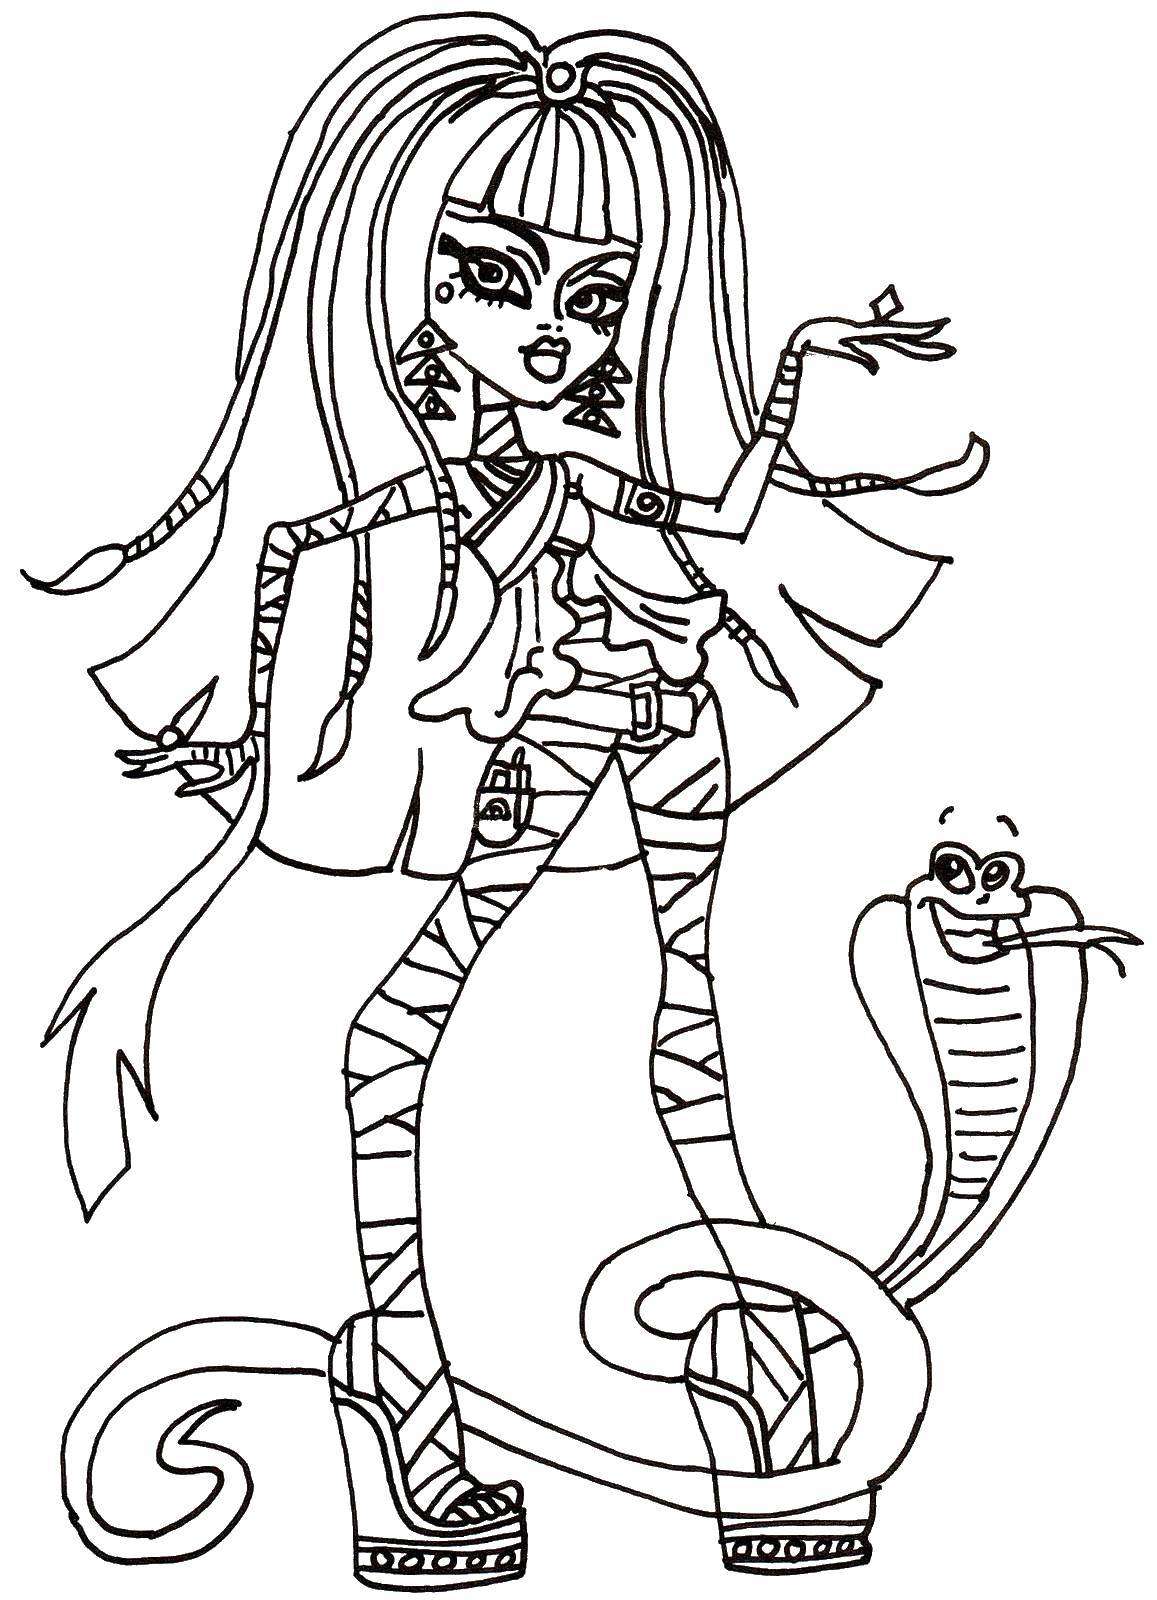 Coloring Mummy with a snake. Category school of monsters. Tags:  Monster High.